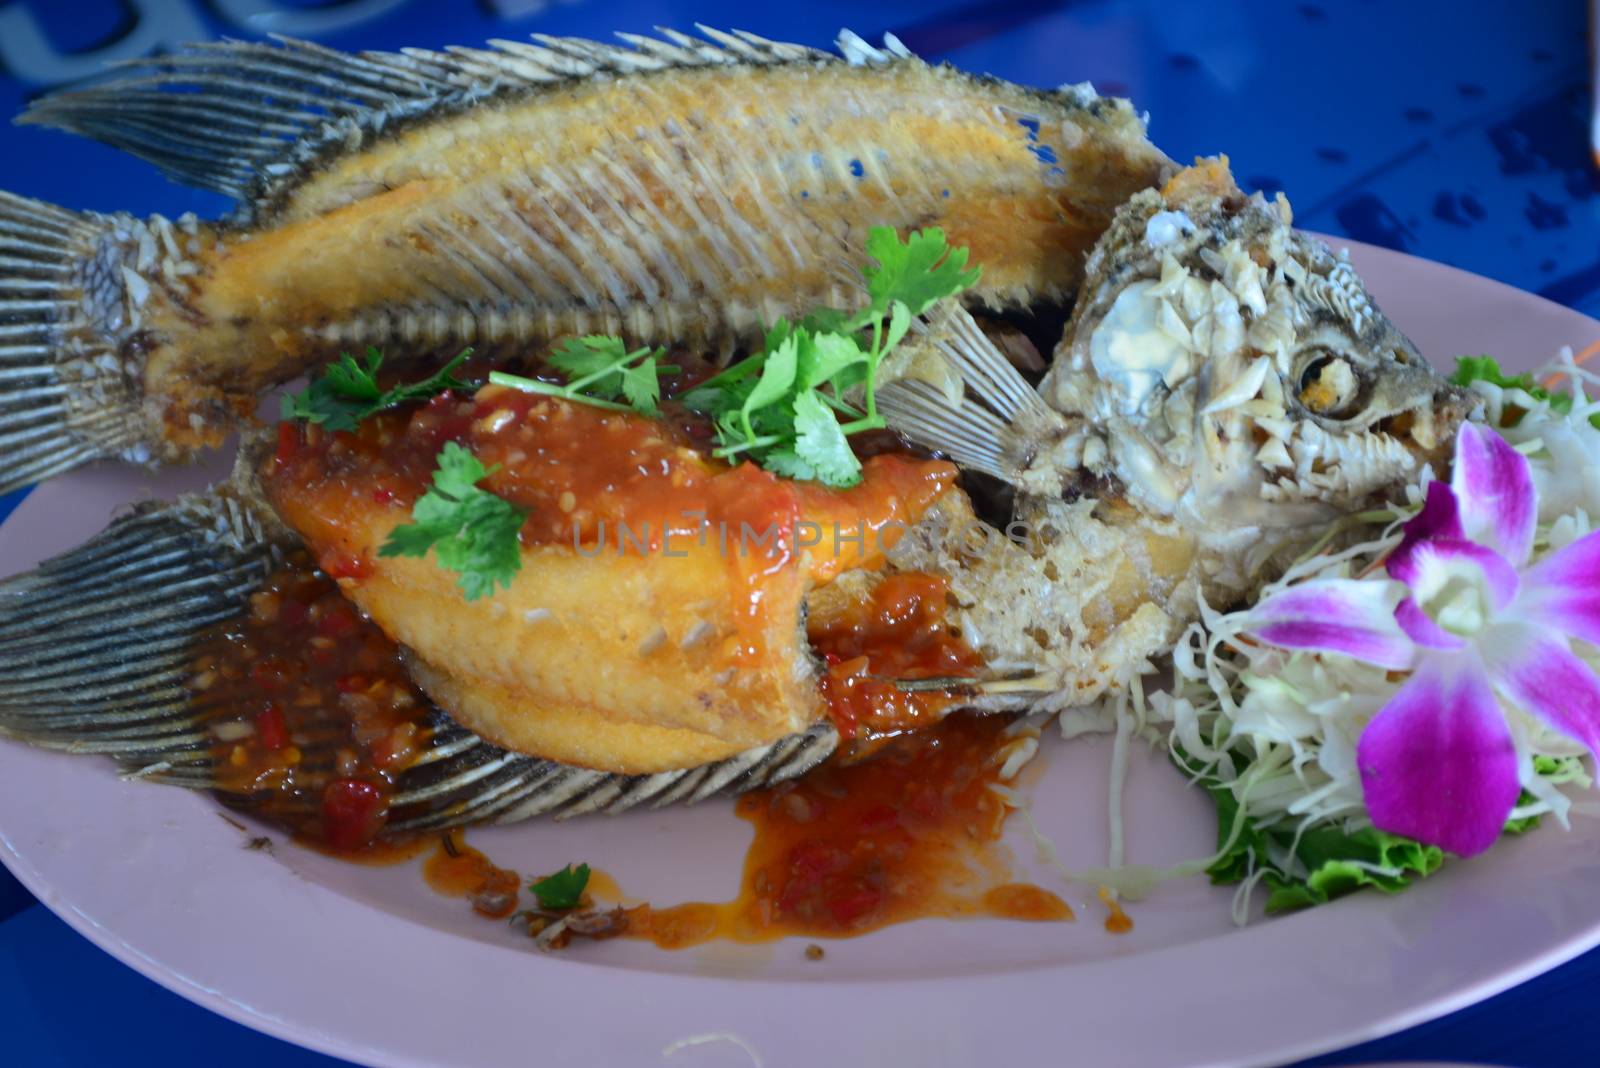 Fried fish with sweet chili sauce recipe, Thaifood by ideation90